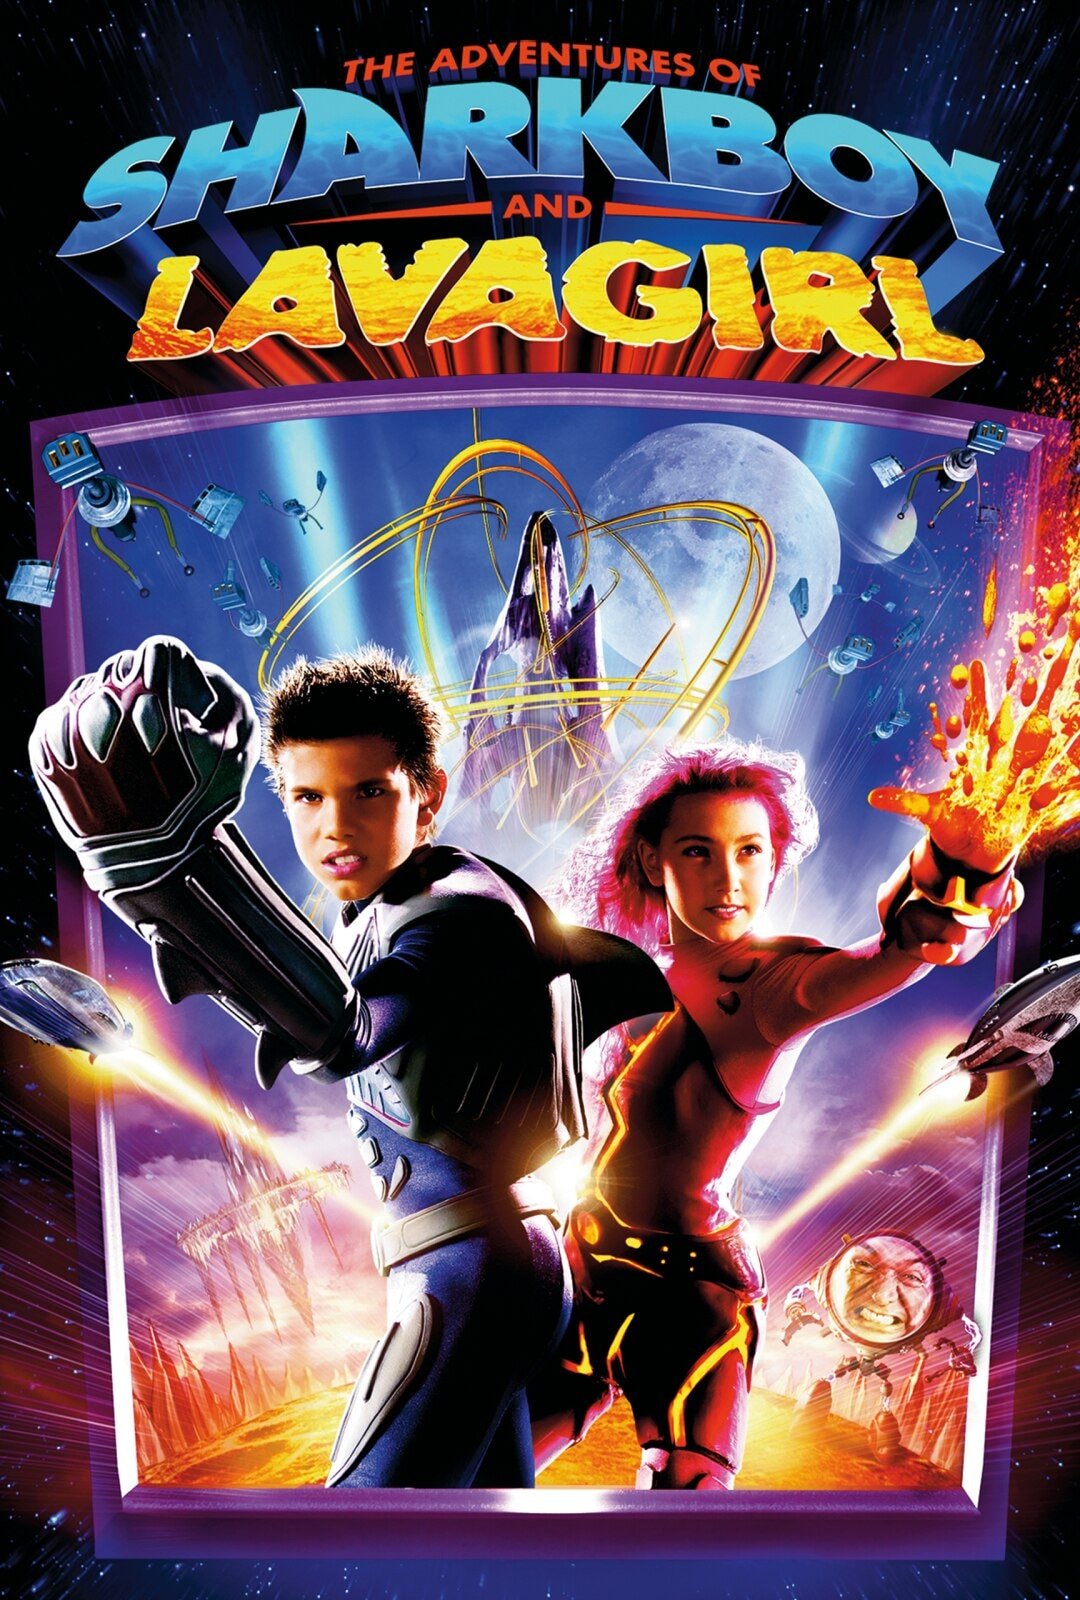 The Adventures Of Sharkboy And Lavagirl (2005)